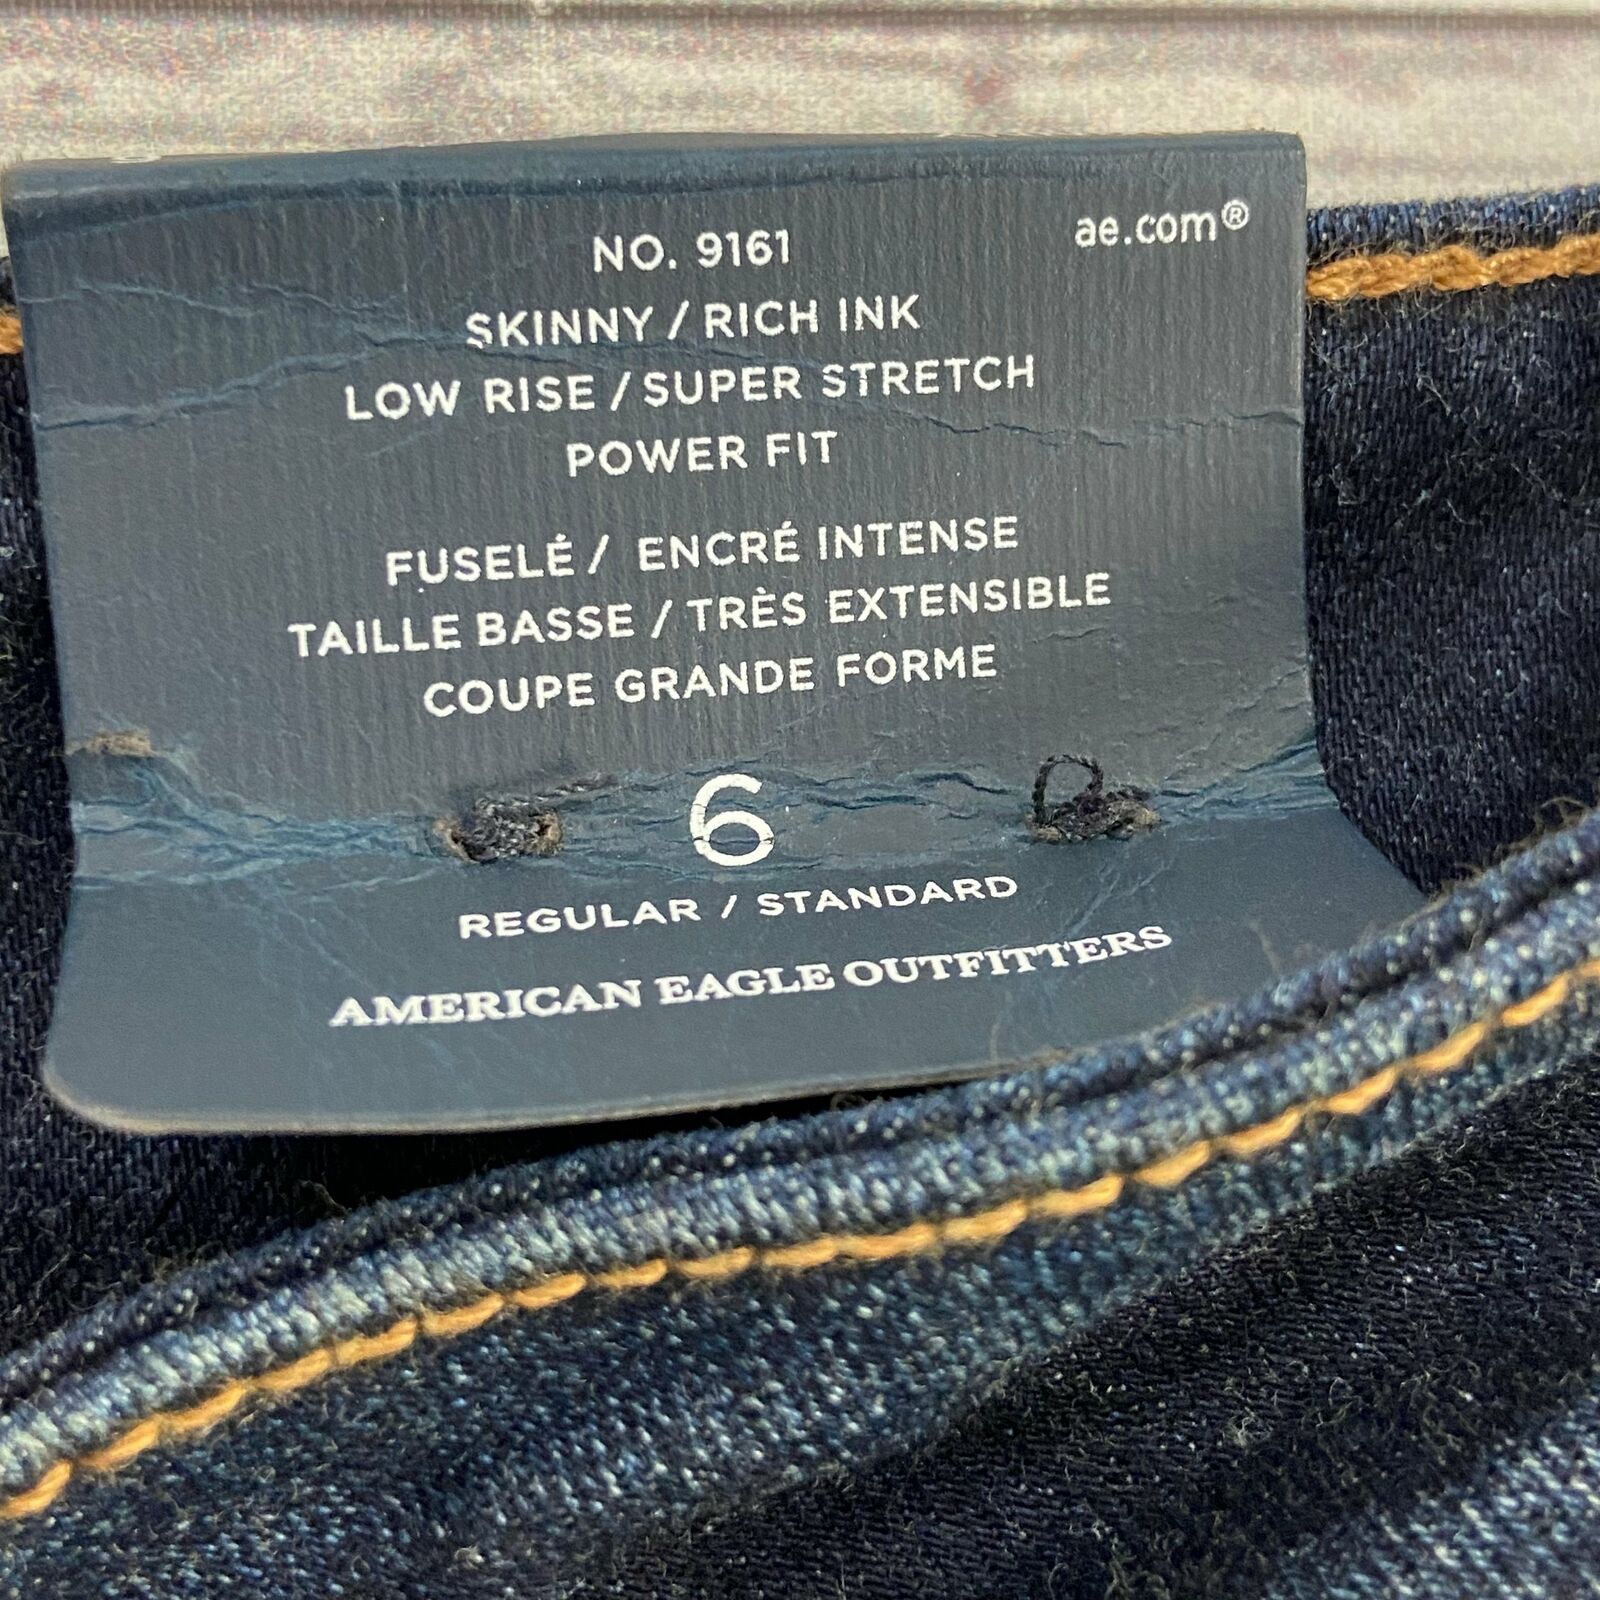 American Eagle AEO Denim Blue Jeans Skinny Fit Woman's Size 6 NEW